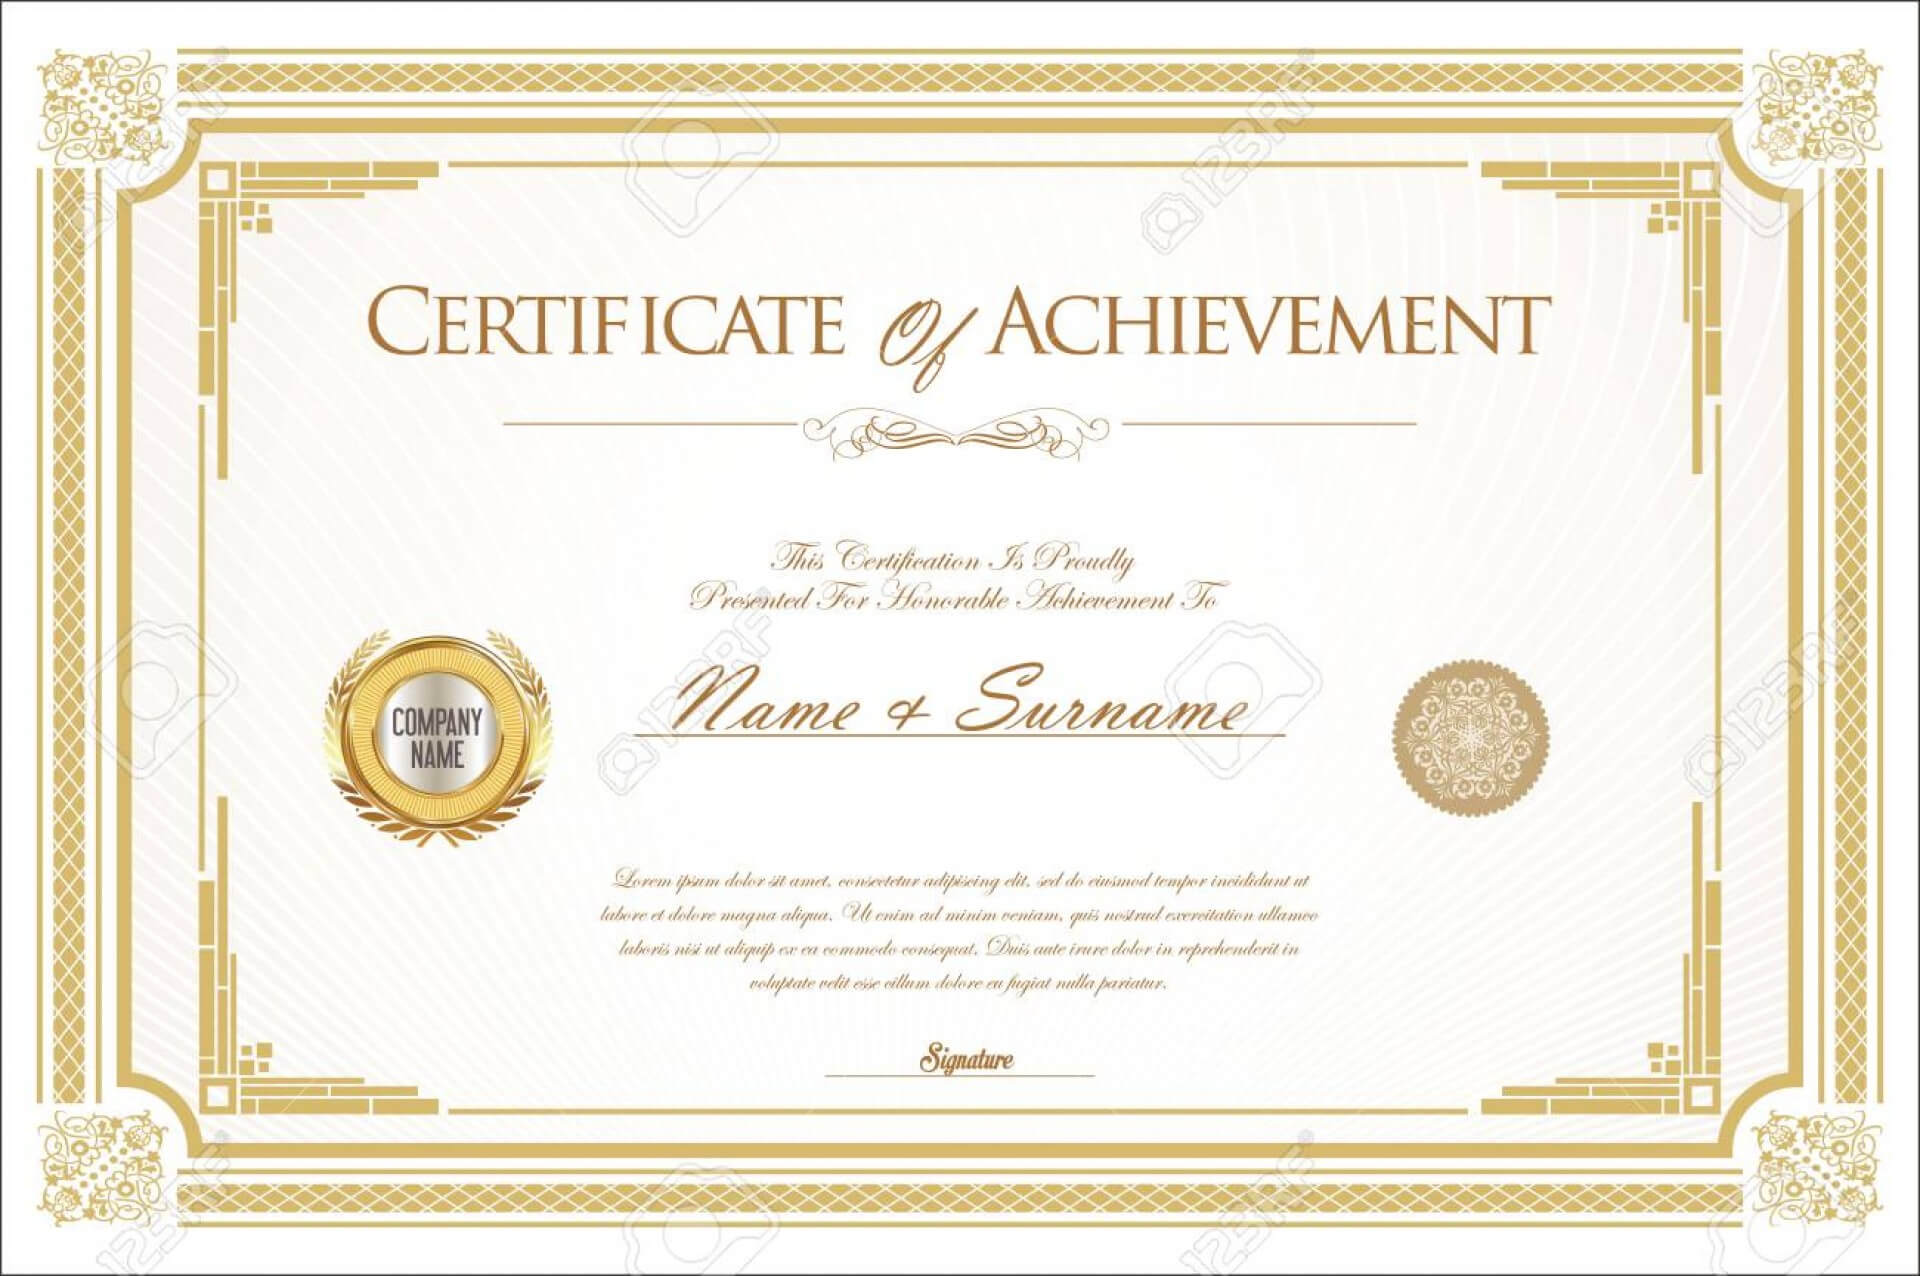 005 Template Ideas Army Certificate Of Achievement Microsoft Within Certificate Of Achievement Army Template